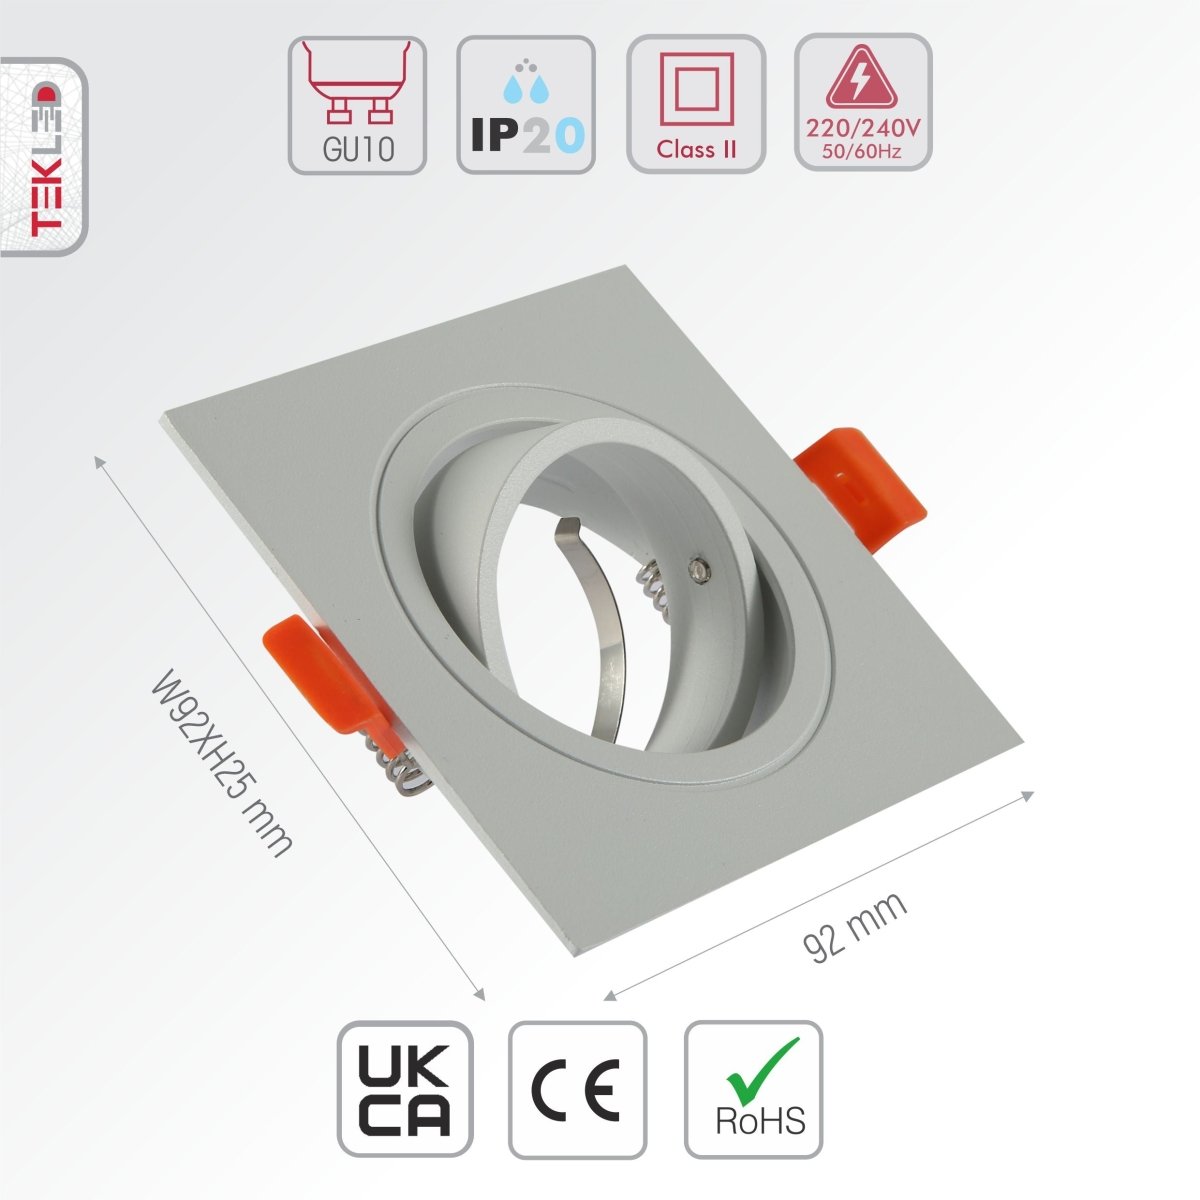 Size and specs of Square Recessed Tilt Downlight White with GU10 Fitting | TEKLED 165-03884